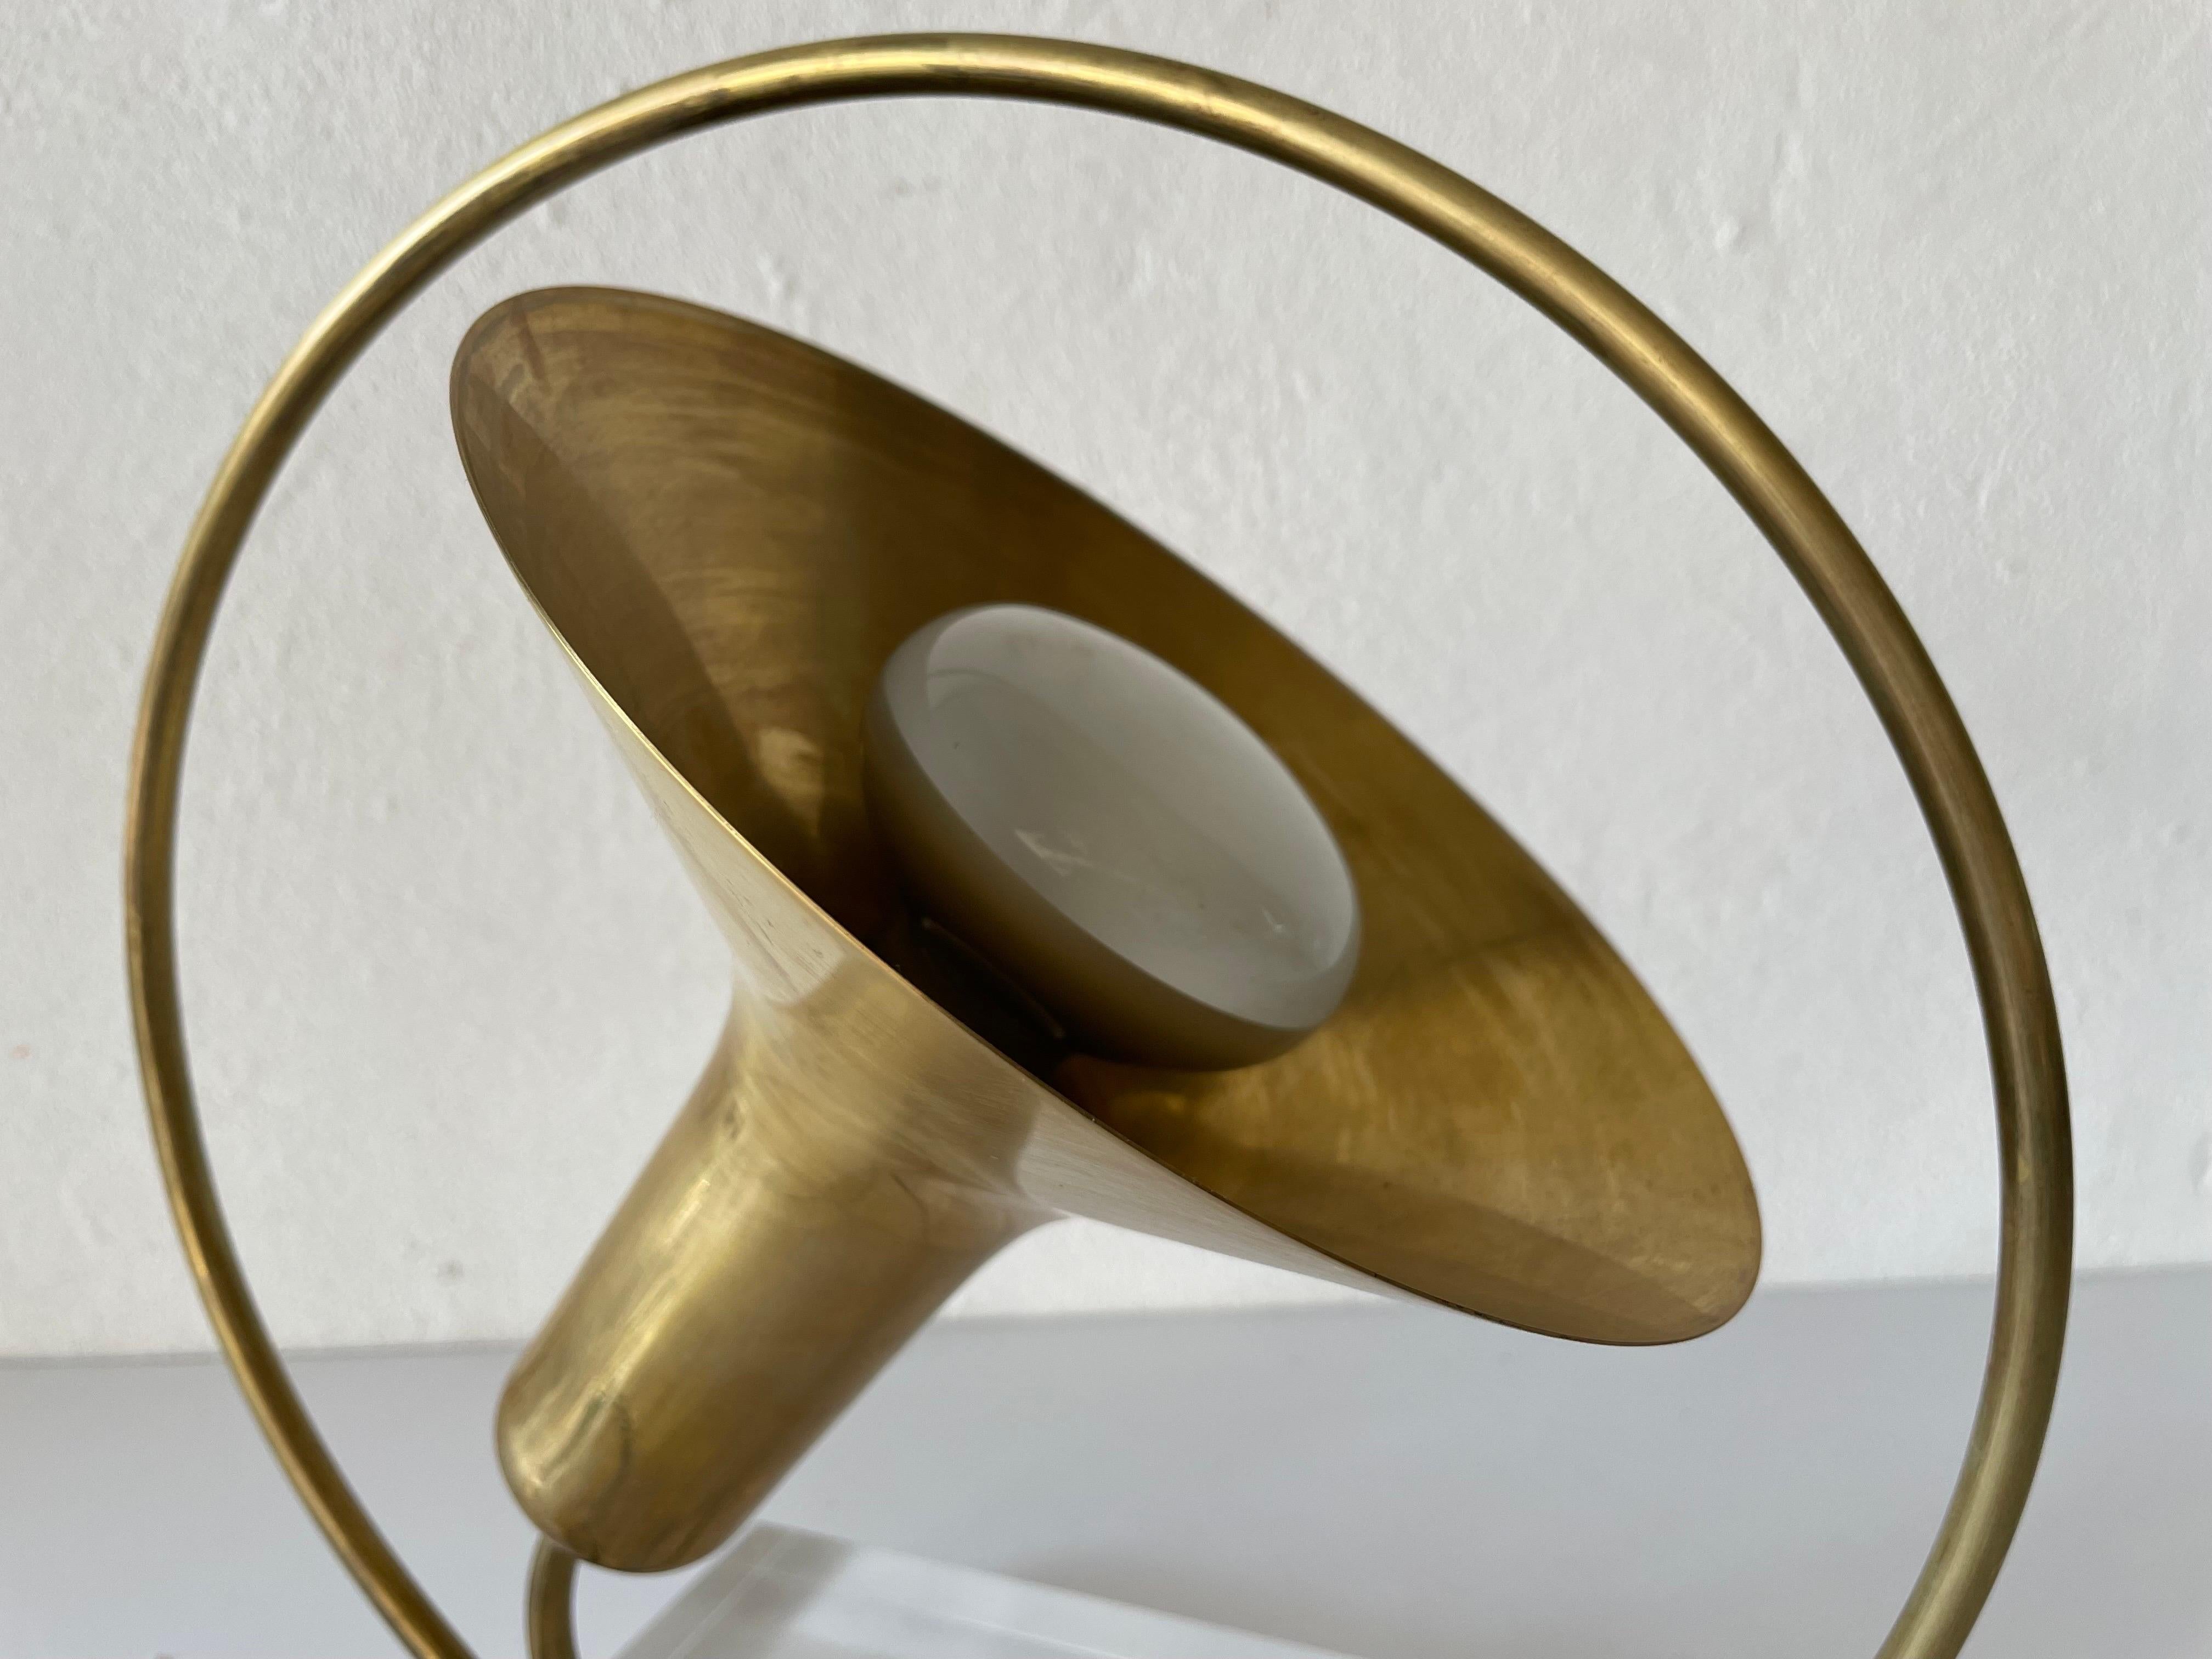 Brass & Lucite Trumpet Design Table Lamp, 1960s, Italy For Sale 1